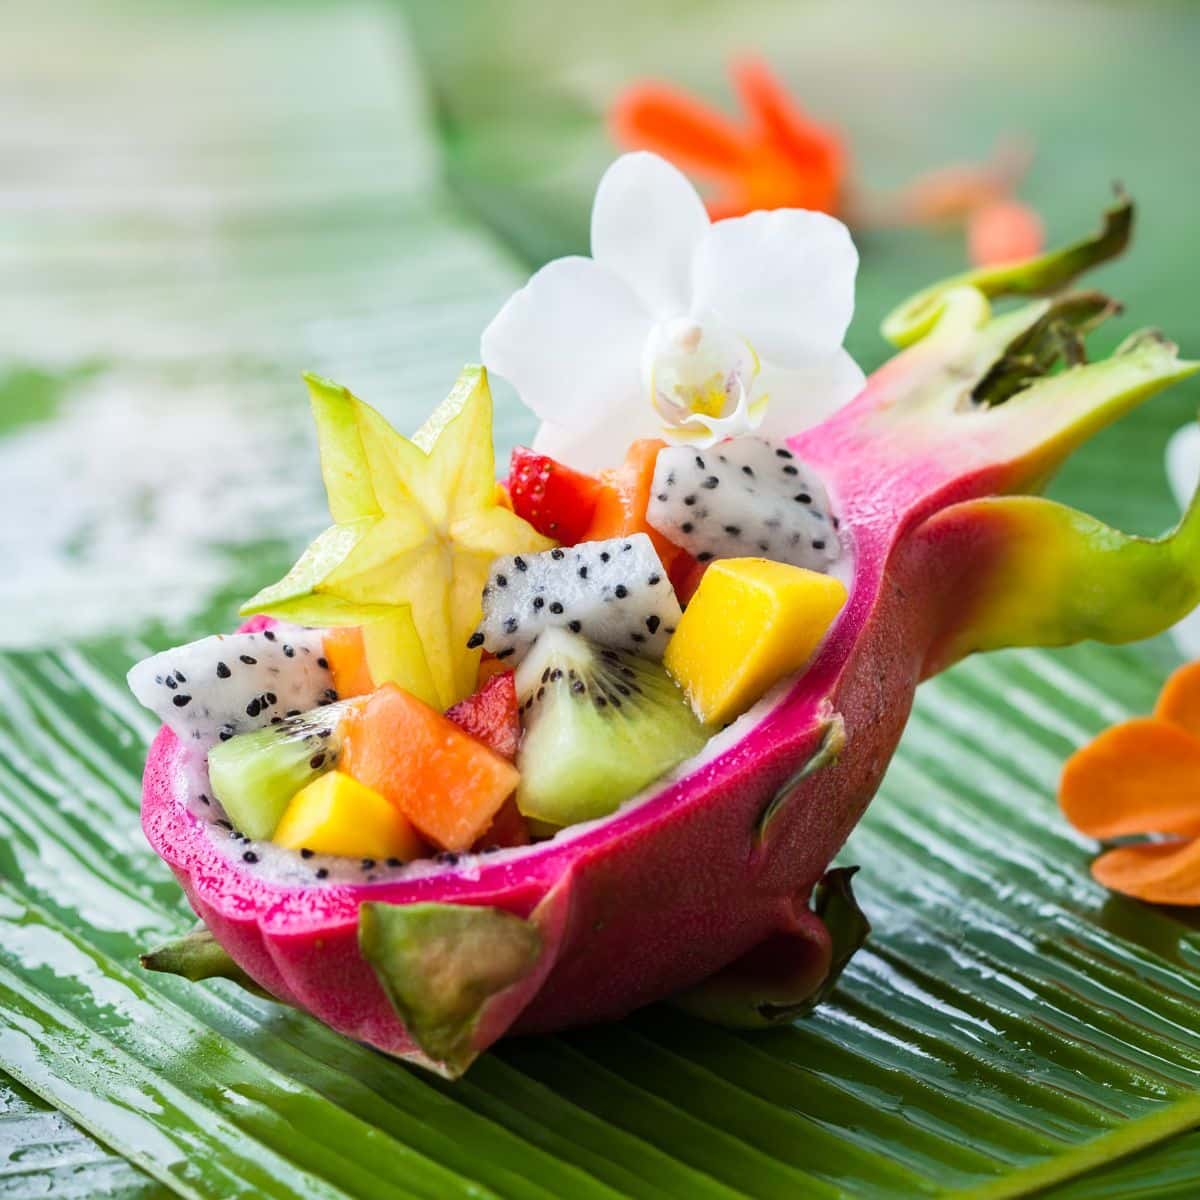 fruit salad arranged in a dragon fruit shell.